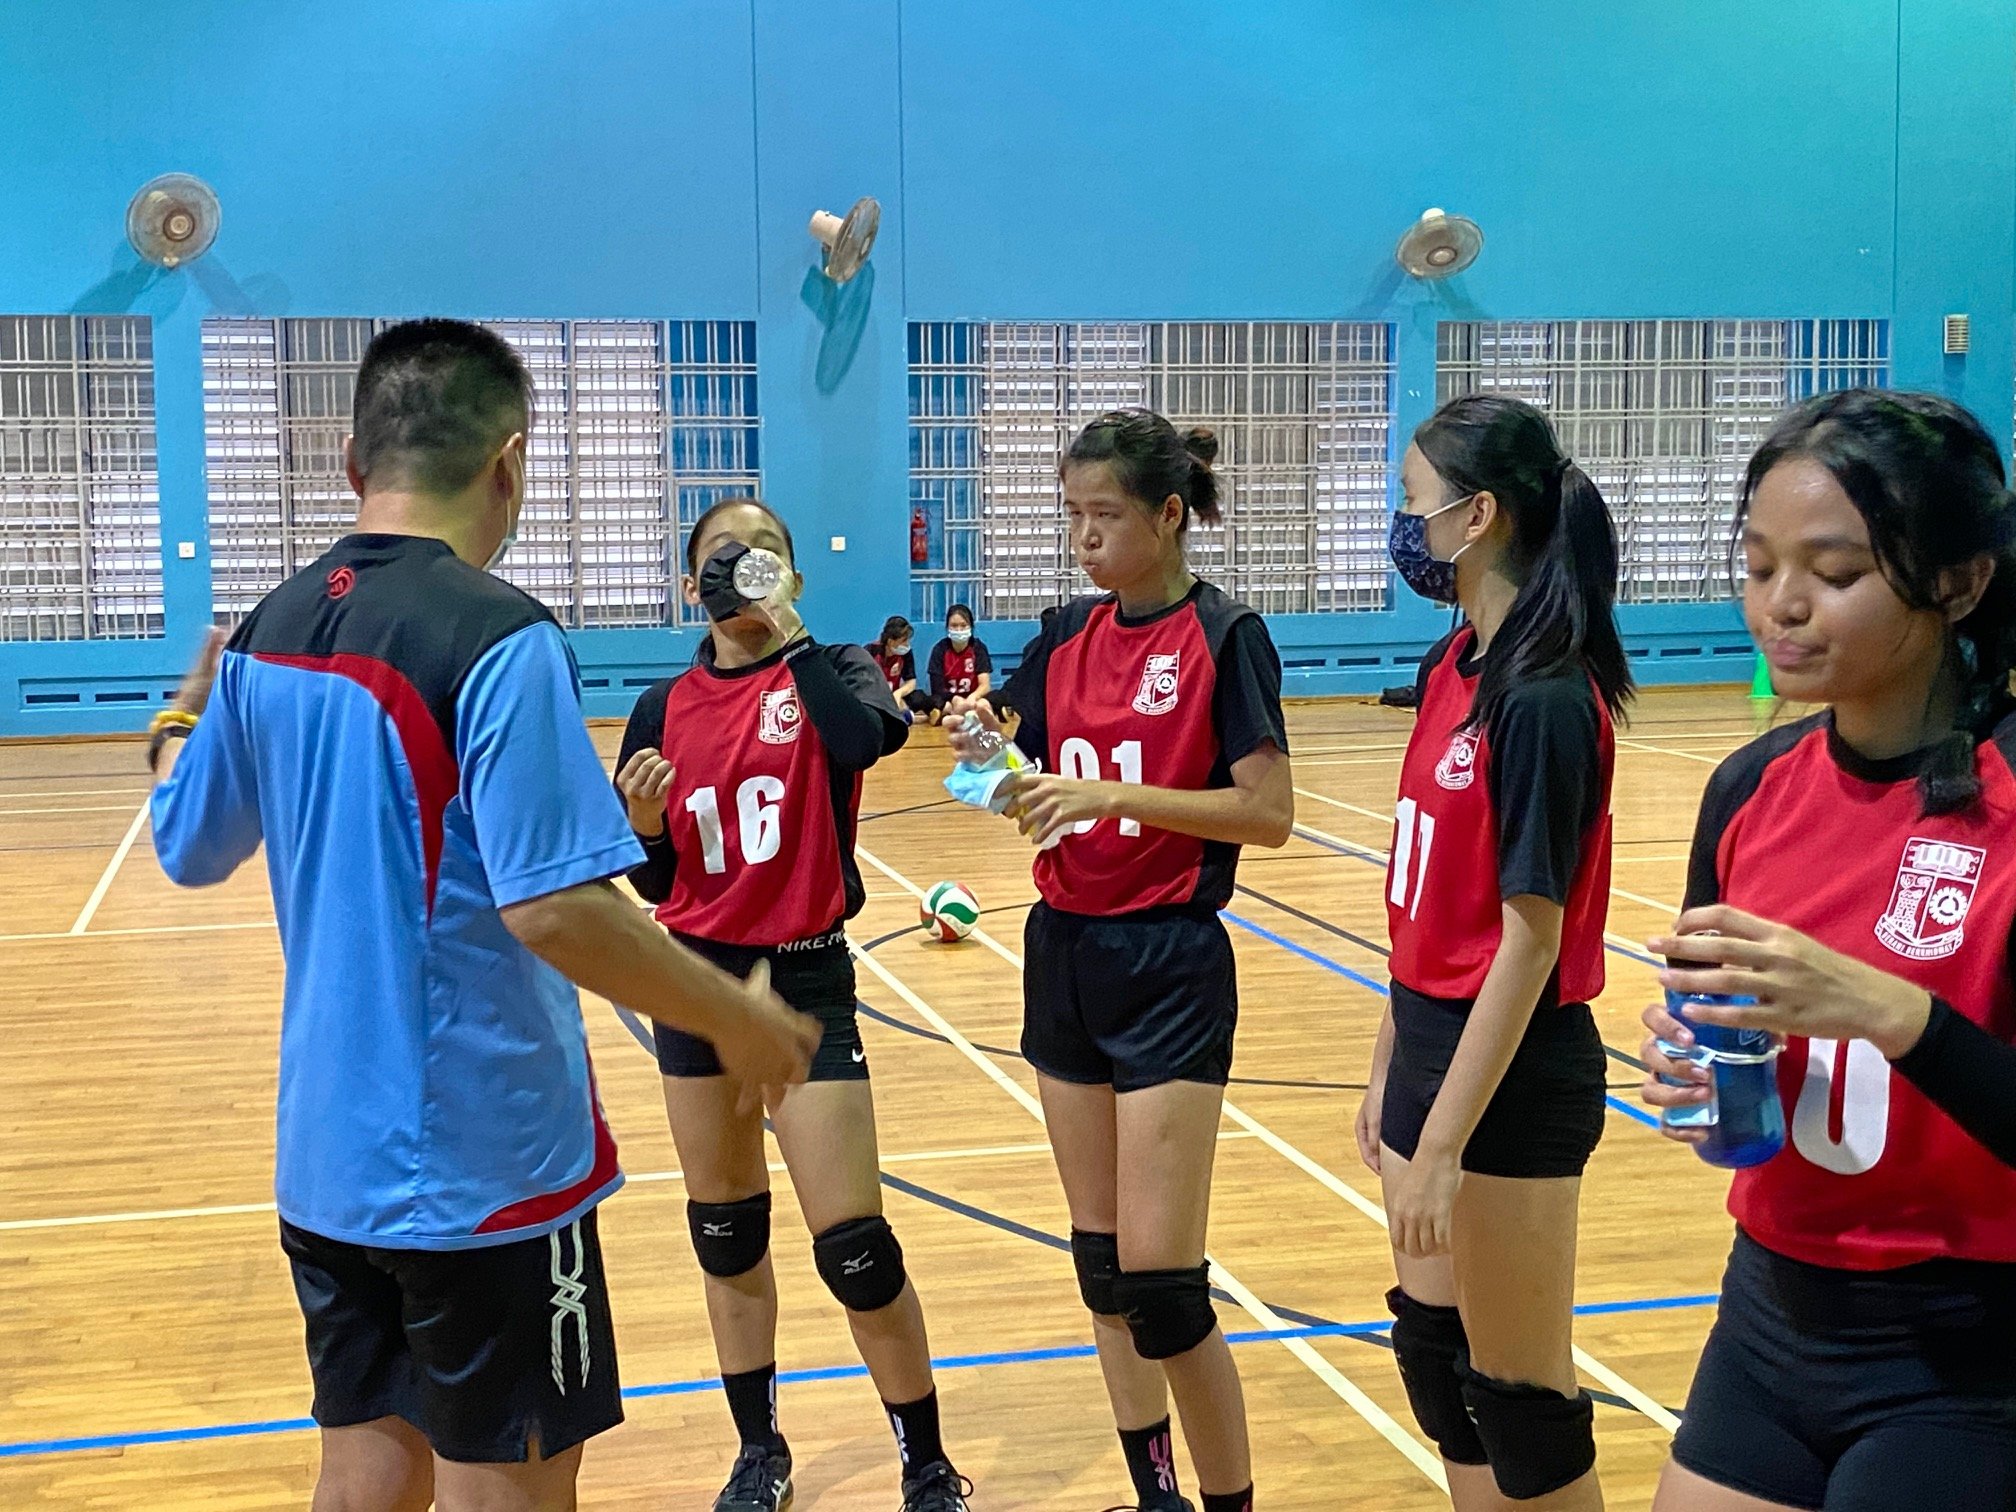 NSG South Zone B Div girls volleyball final - Queenstown (red) v Queensway (purple) 3